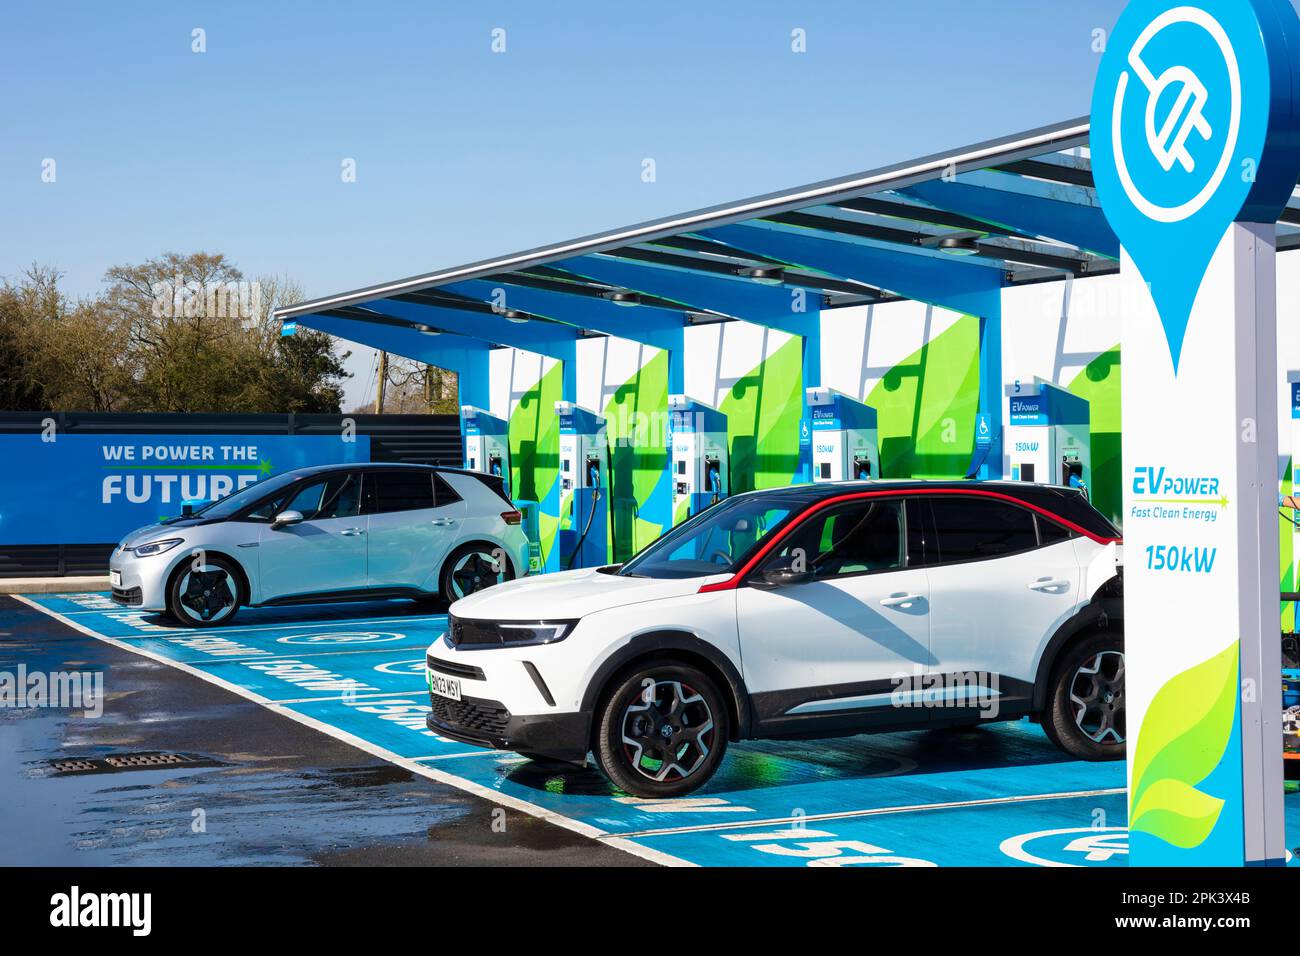 electric cars UK - electric cars charging at public electric car chargers in an MFG EV Power EV charging station UK electric vehicles Stock Photo